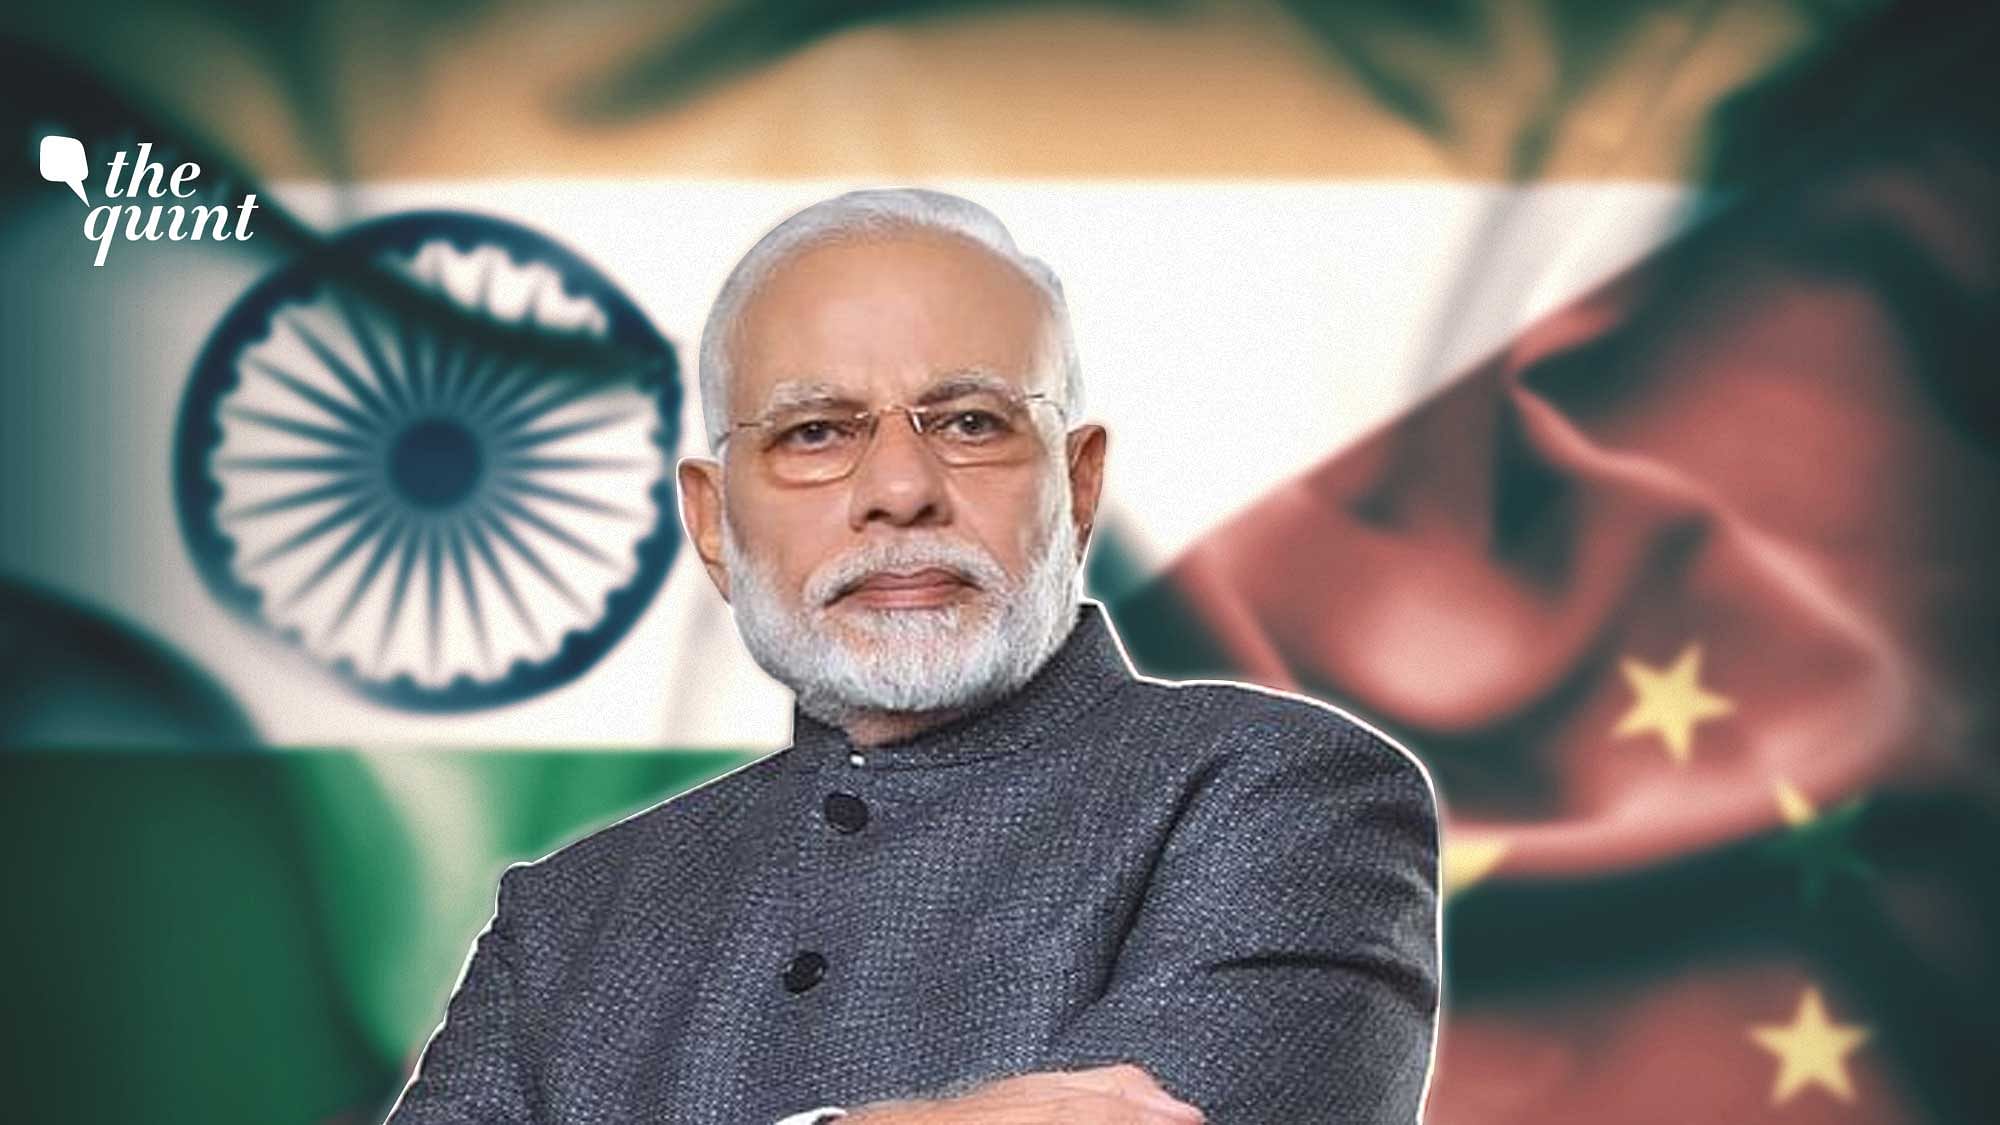 Image of PM Modi and Indian &amp; Chinese flags (in the background) used for representational purposes.